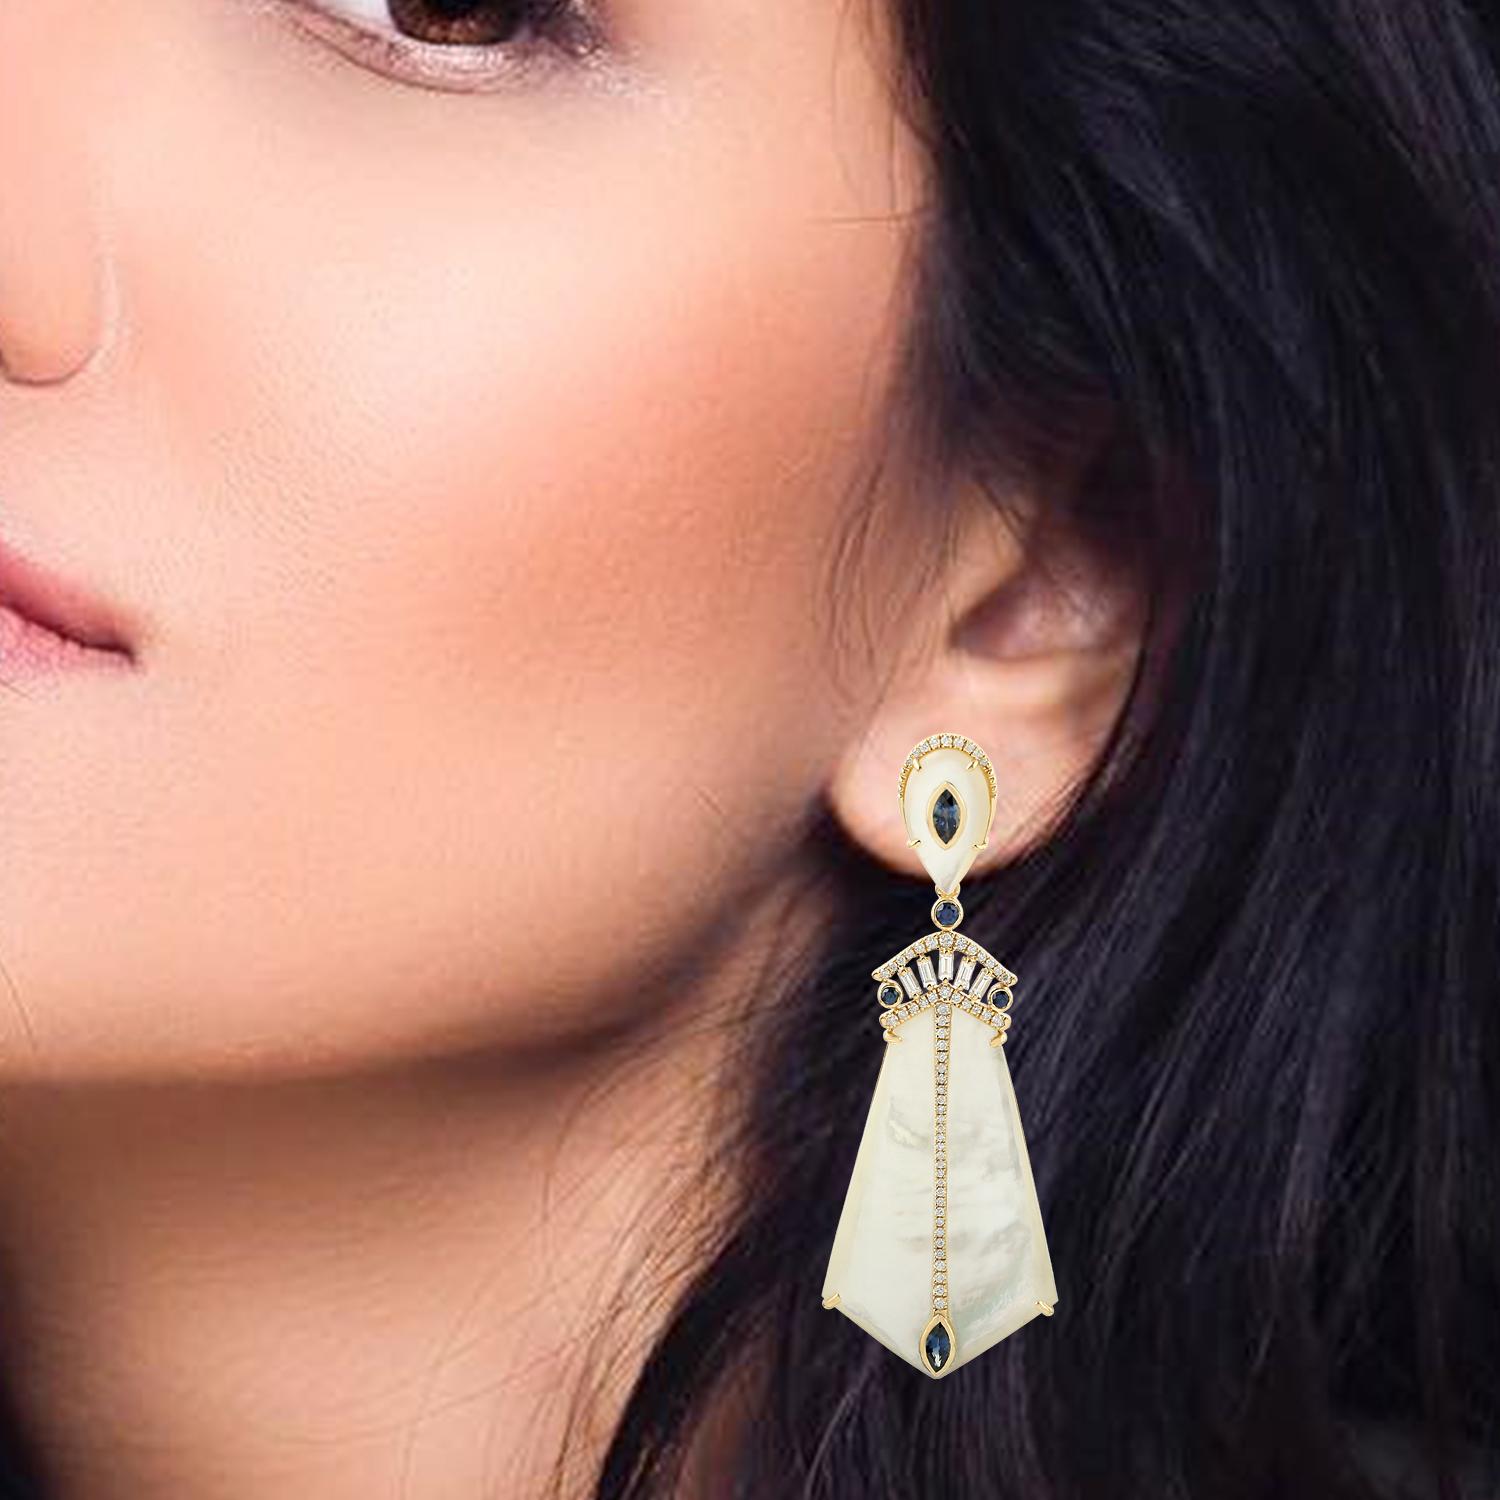 Cast in 18-karat gold, these beautiful earrings are set with 51.25 carats mother of pearl, 1.7 carats Sapphire and 1.23 carats of glimmering diamonds. 

Please note that carat weights may slightly vary as each Meghna Jewels creation is handmade.